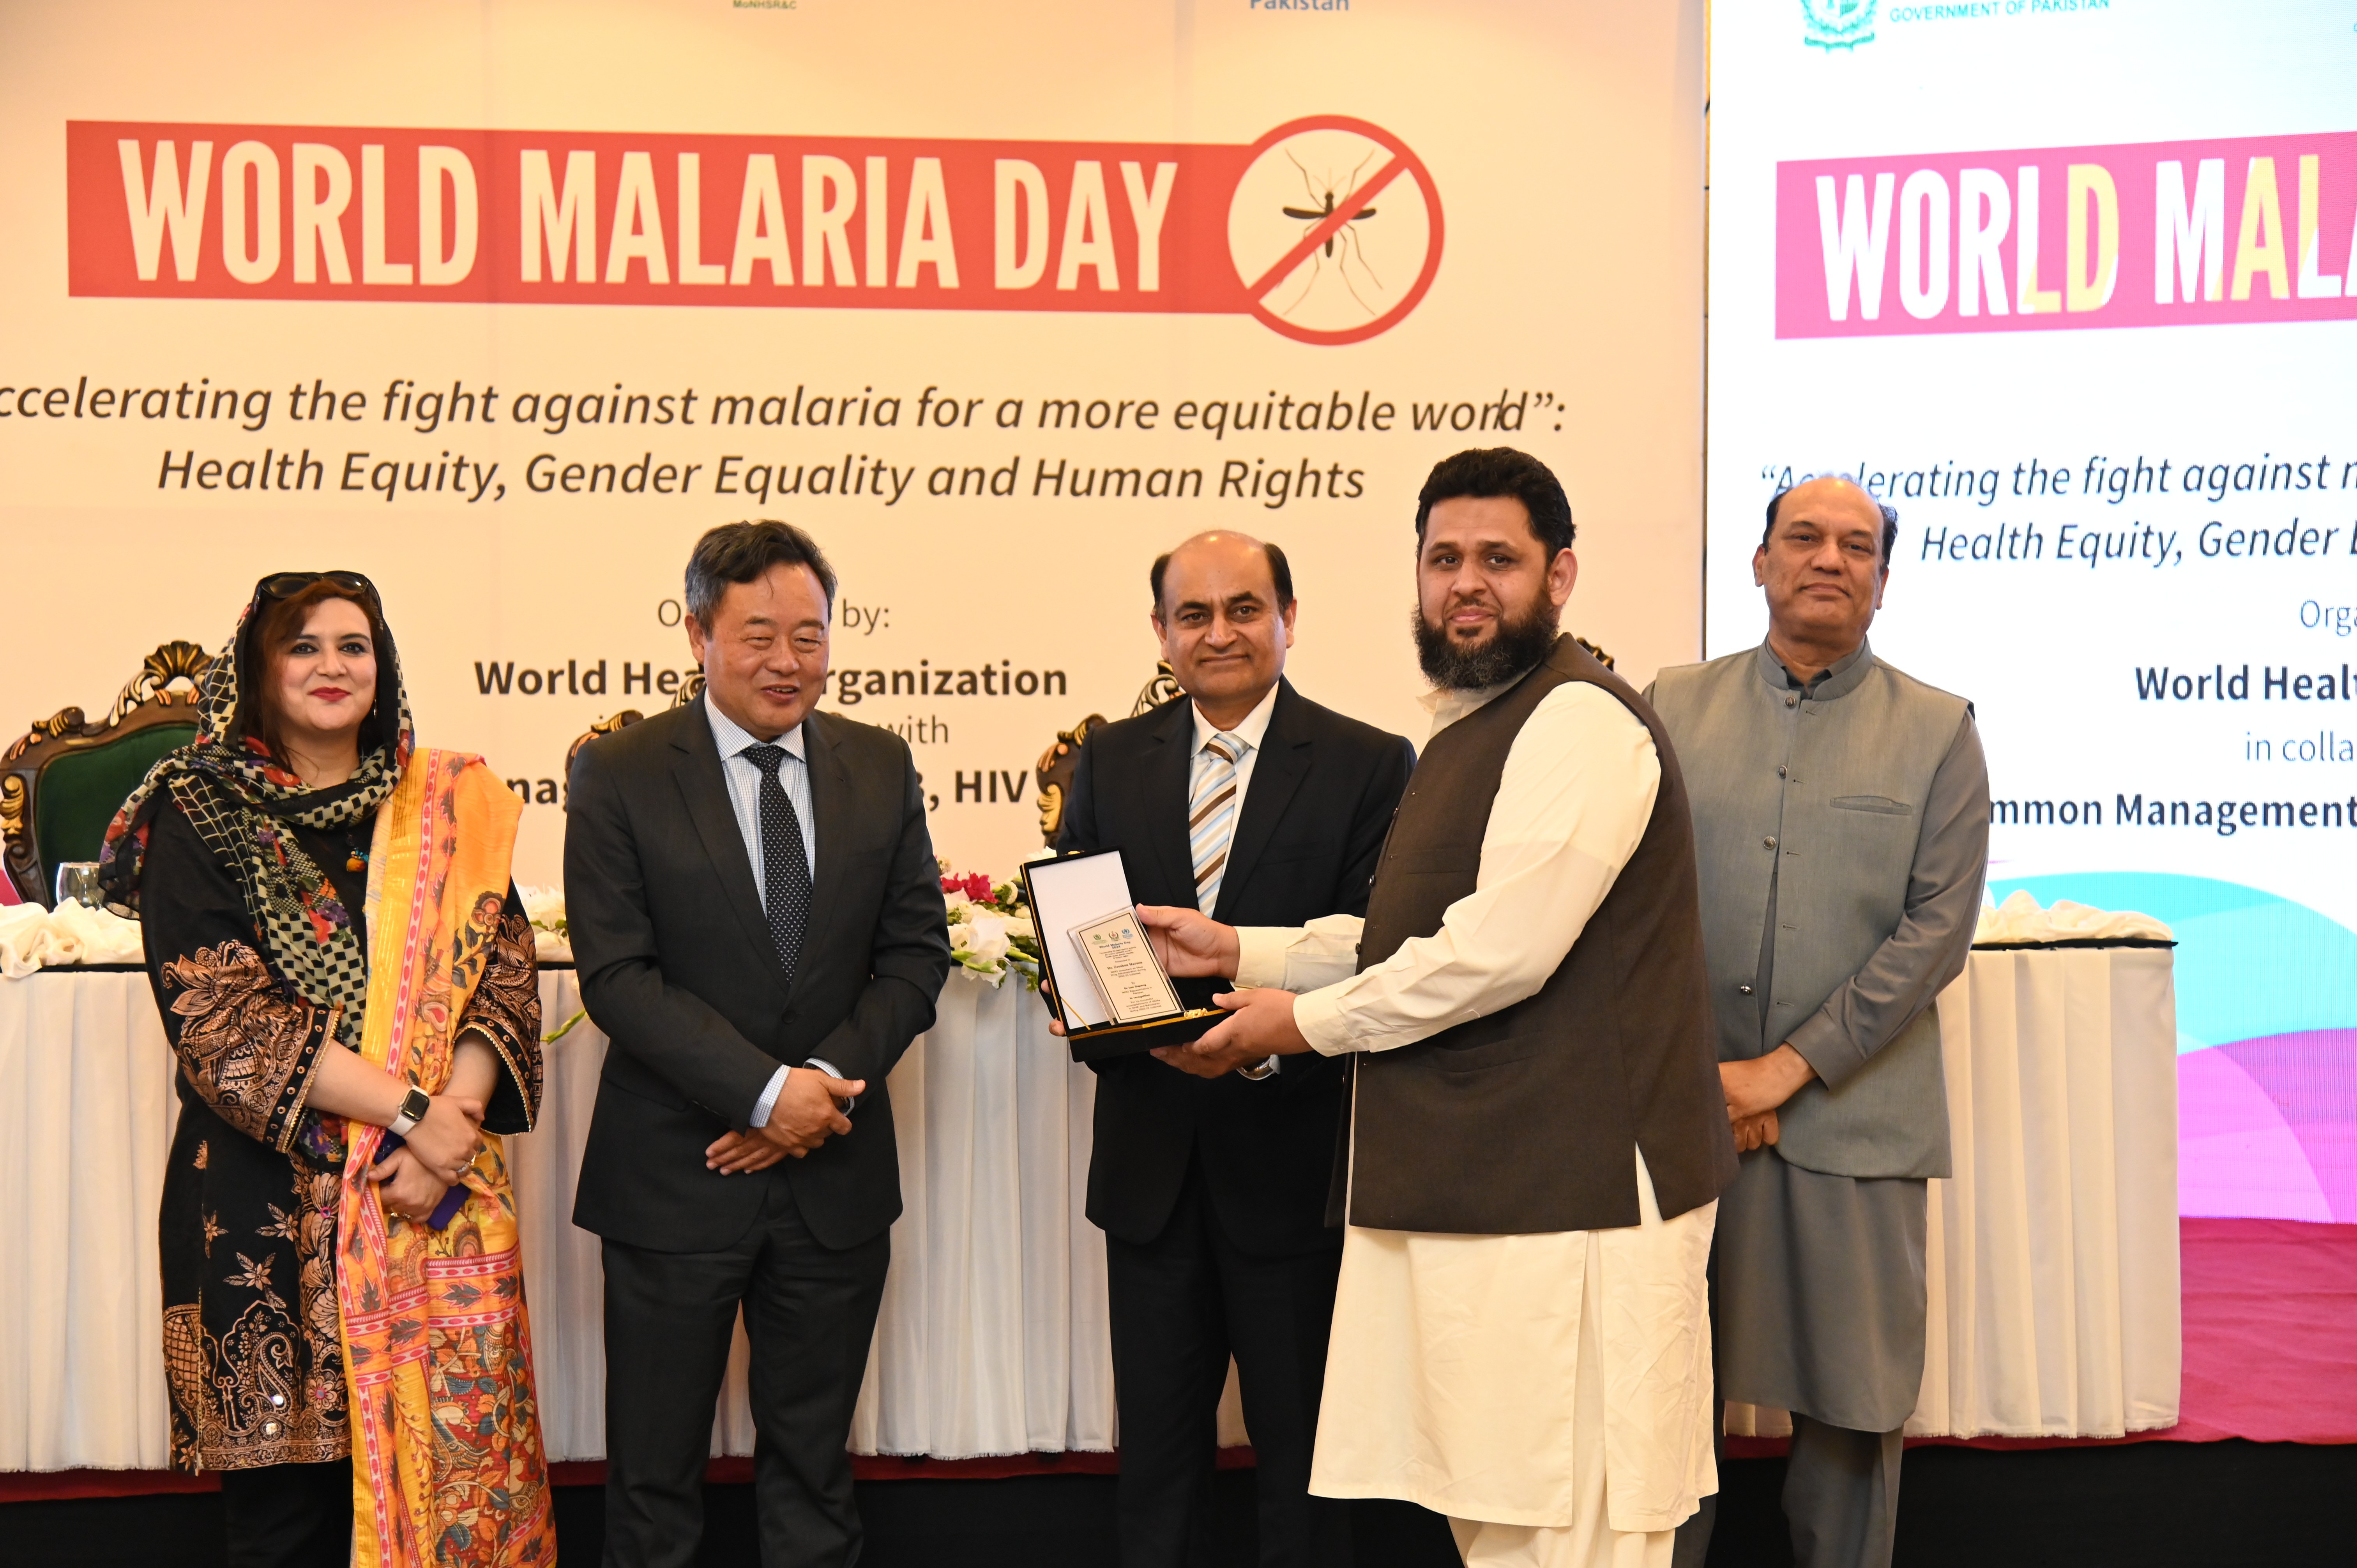 The shield distribution at the event of World Malaria Day 2031